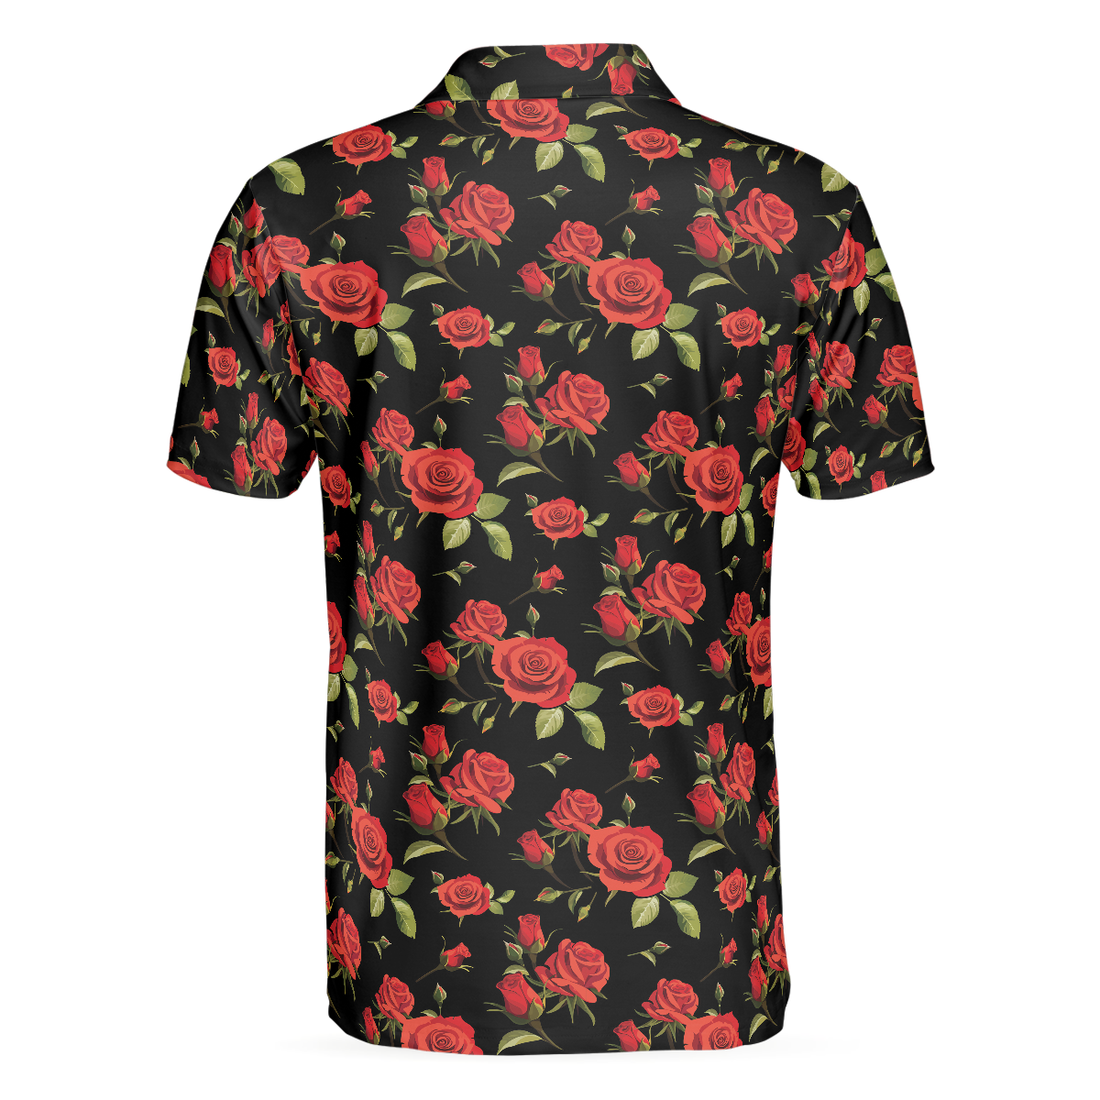 Red Roses Polo Shirt Red Roses Seamless Pattern Shirt For Adults Best Rose Themed Gift Idea For Rose Fans - 1